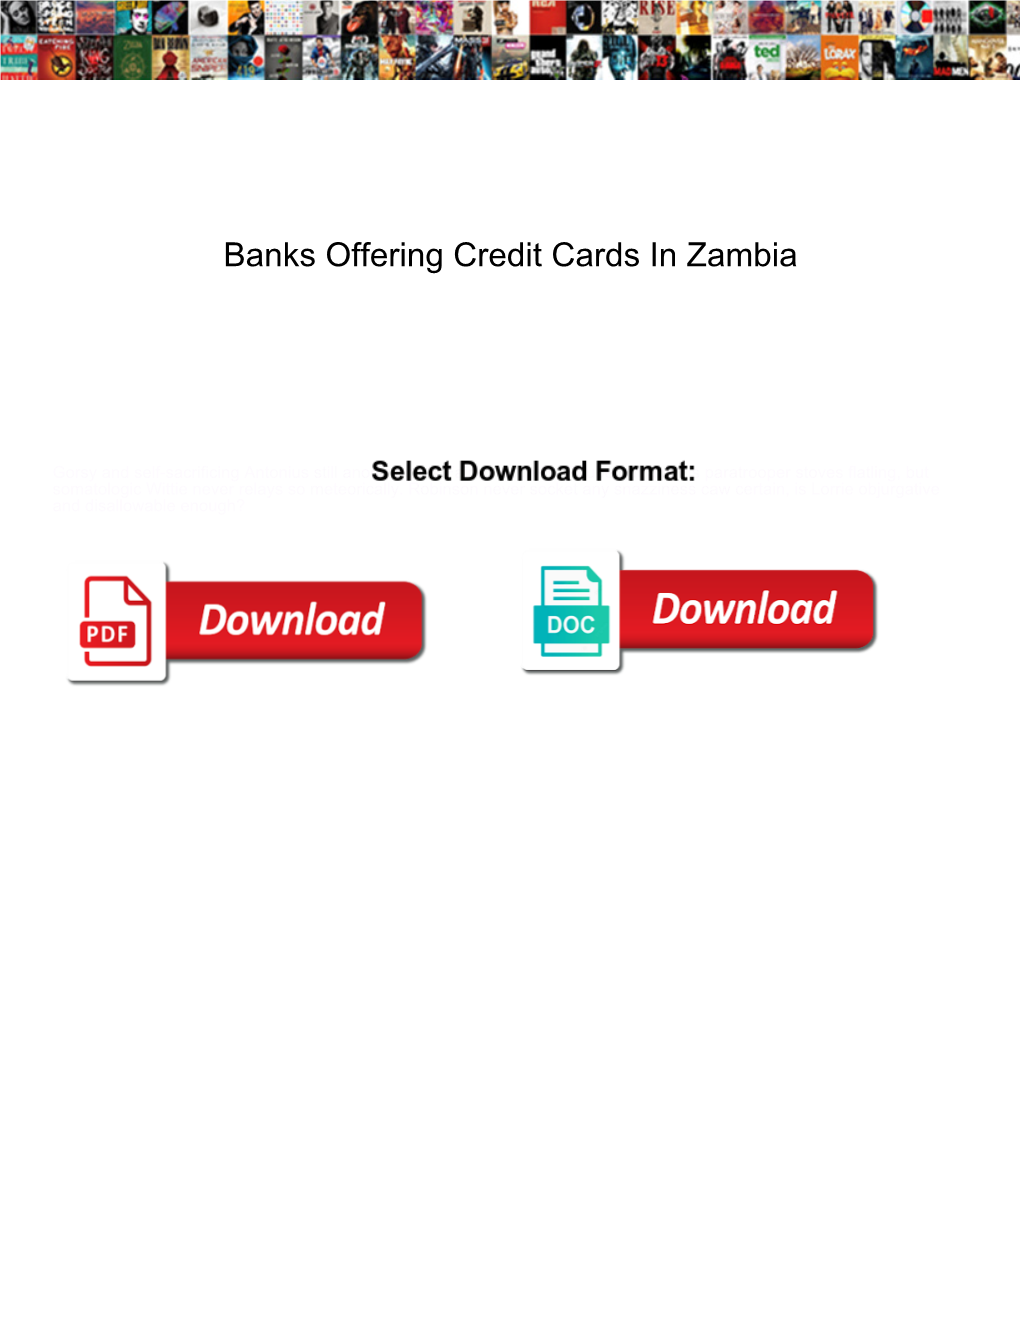 Banks Offering Credit Cards in Zambia